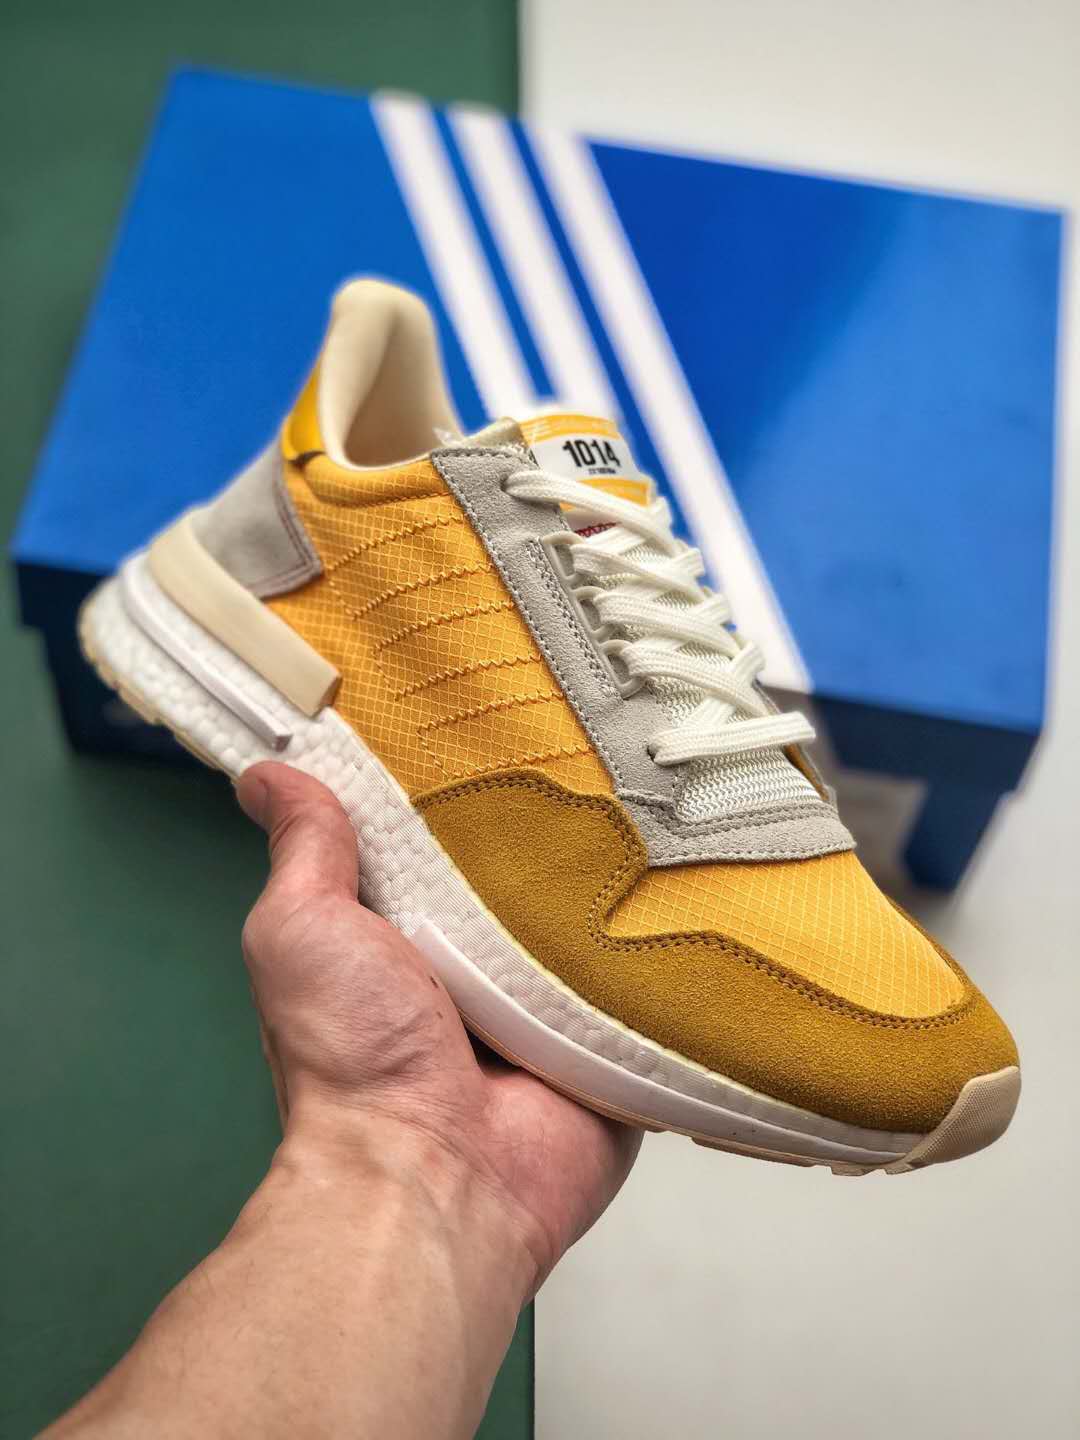 Adidas originals ZX 500 RM 'Bold Gold' CG6860 - Authentic Comfort and Style.